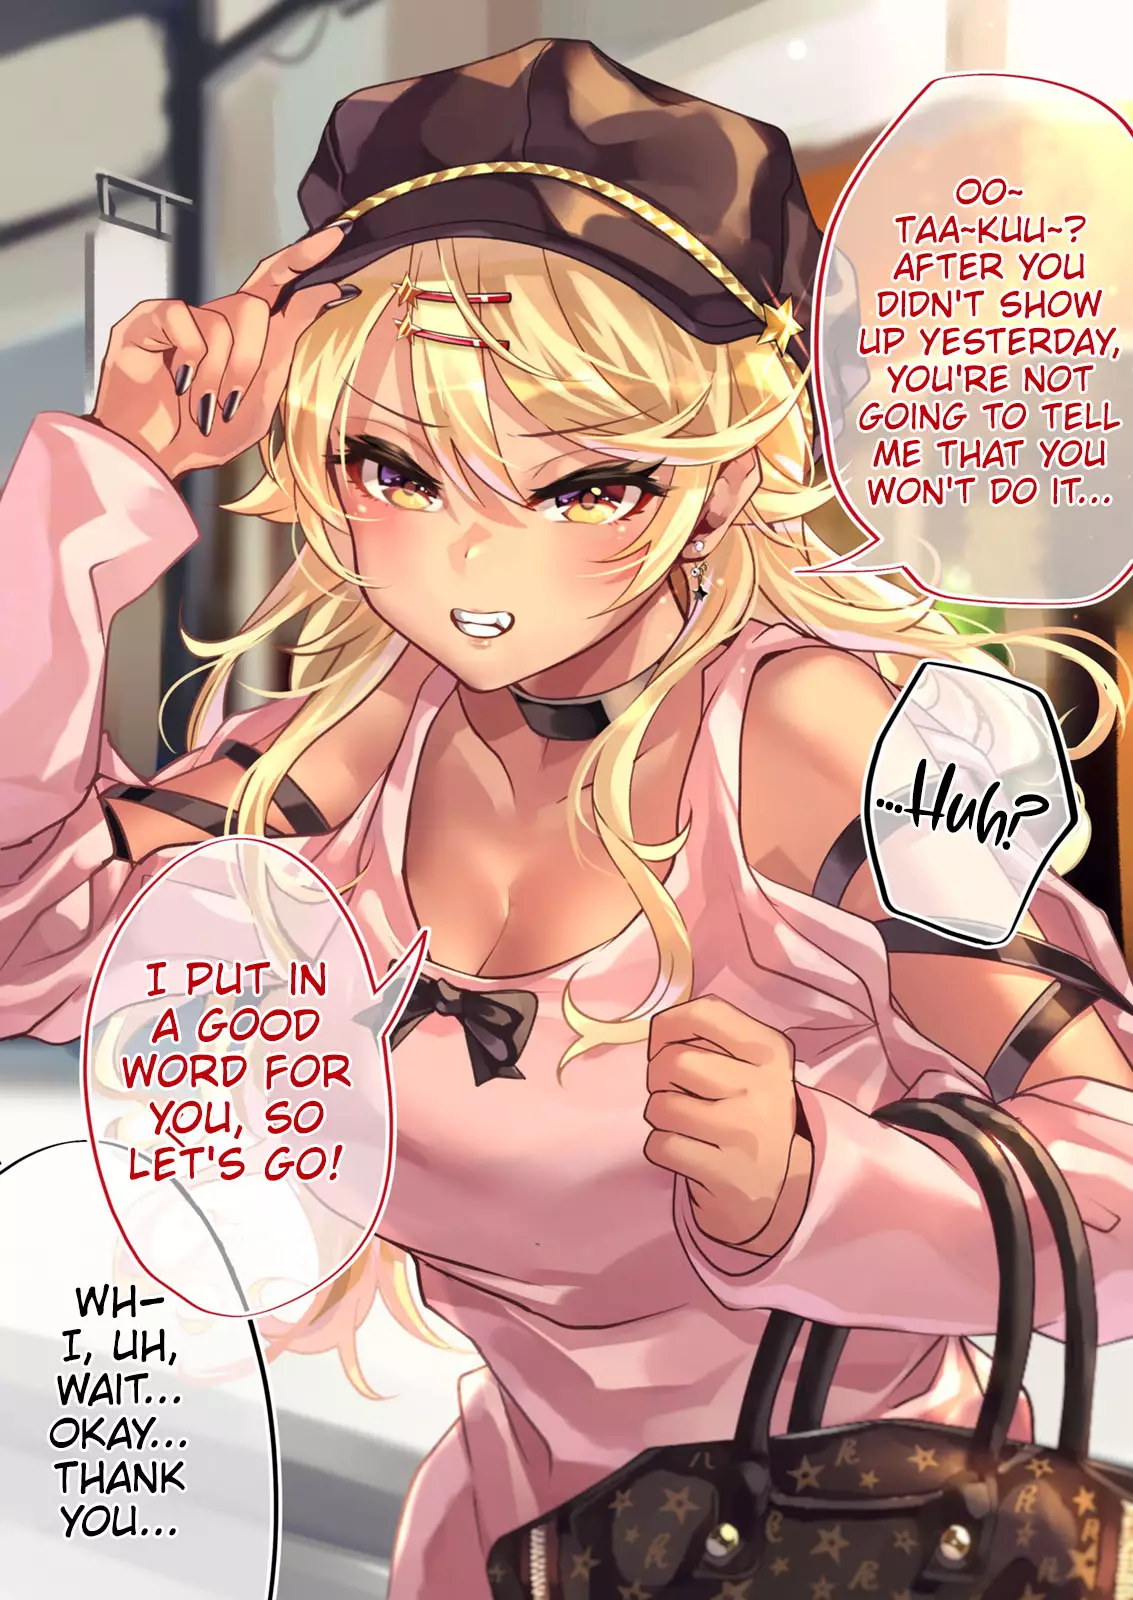 This Gyaru Will Date The Otaku In 100 Days - 23 page 3-2ad510d3